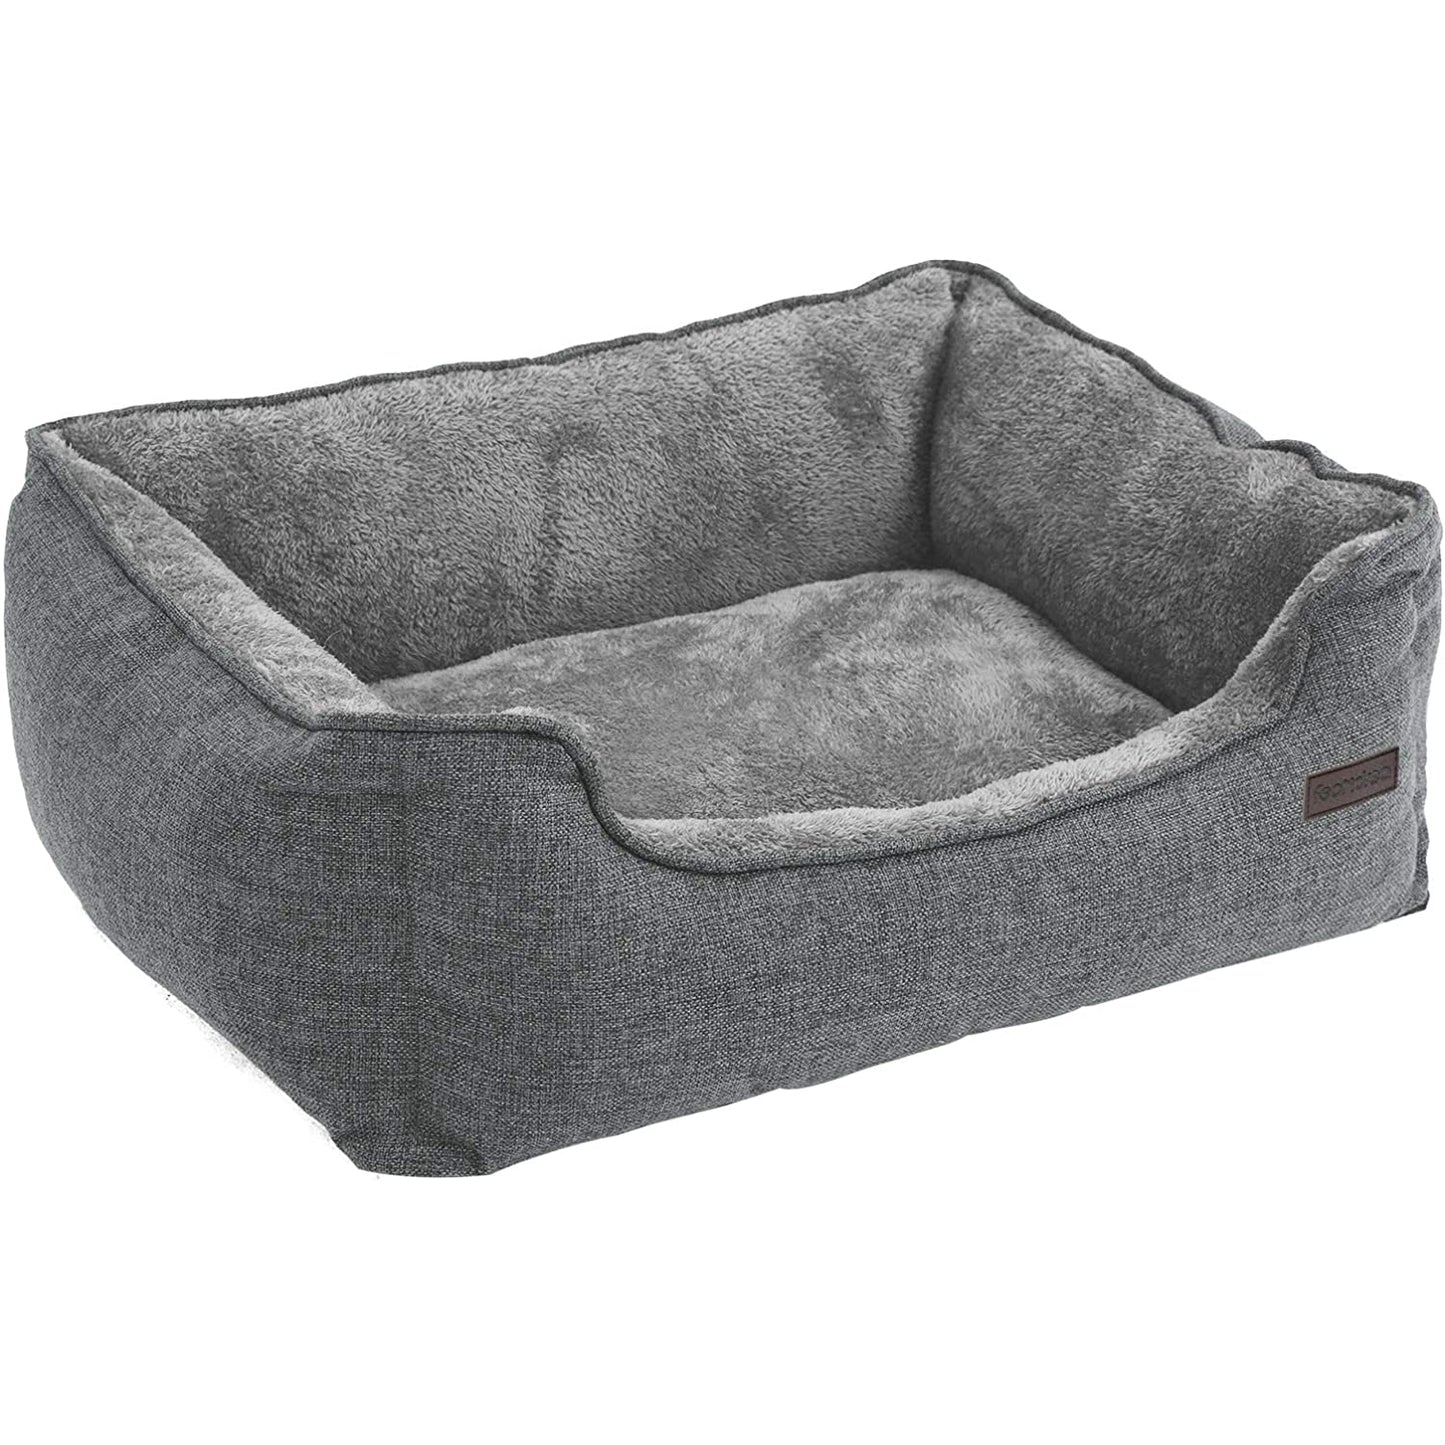 Nancy's Deluxe Dog Bed Washable - Dog Bed - Removable Cover - Dog Beds - 70 x 55 x 21 cm